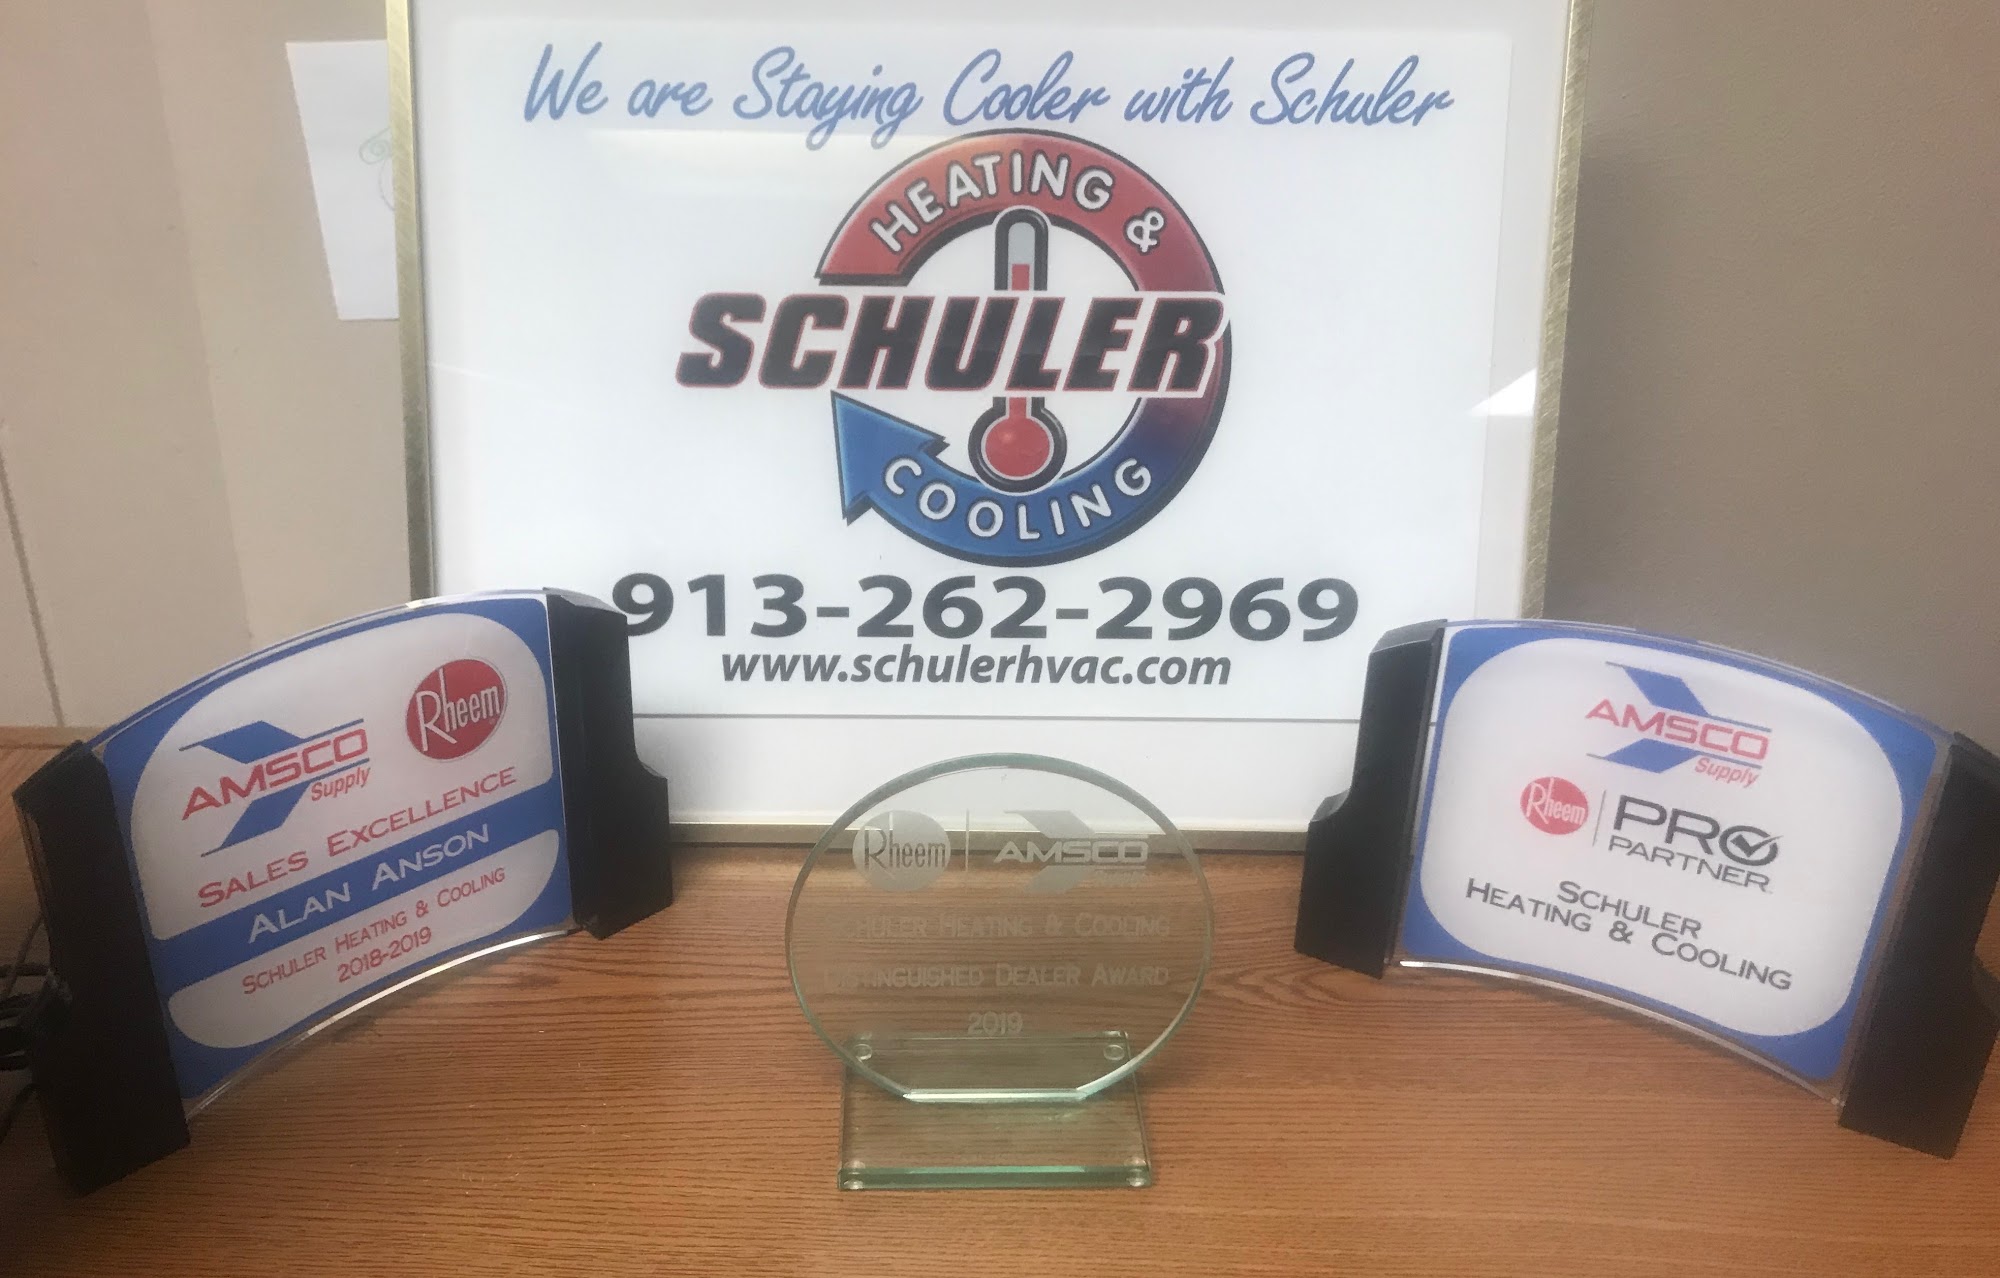 Schuler Heating & Cooling